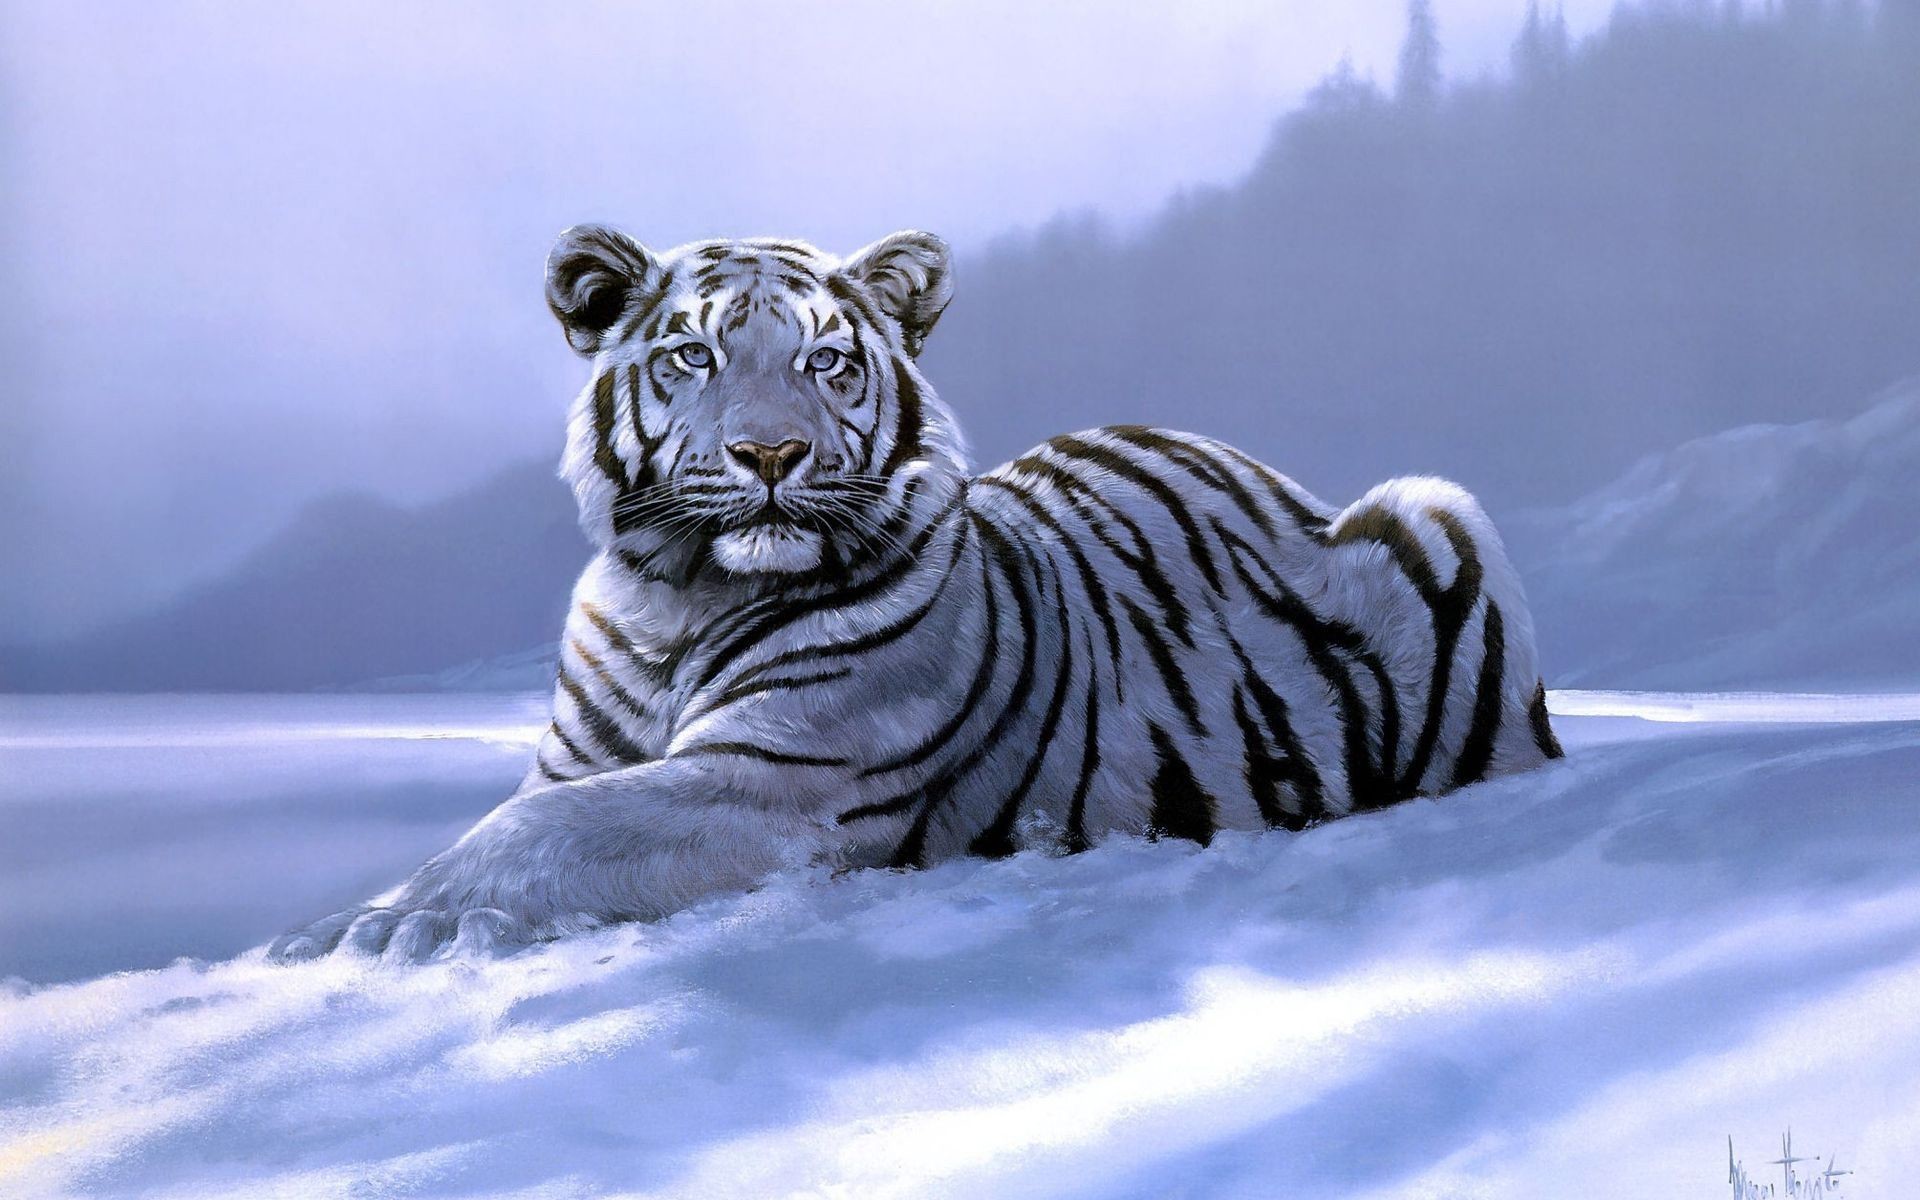 1920x1200 Tiger Wallpaper Android Apps on Google Play 1920Ã1080 Tiger Wallpaper (32  Wallpapers)